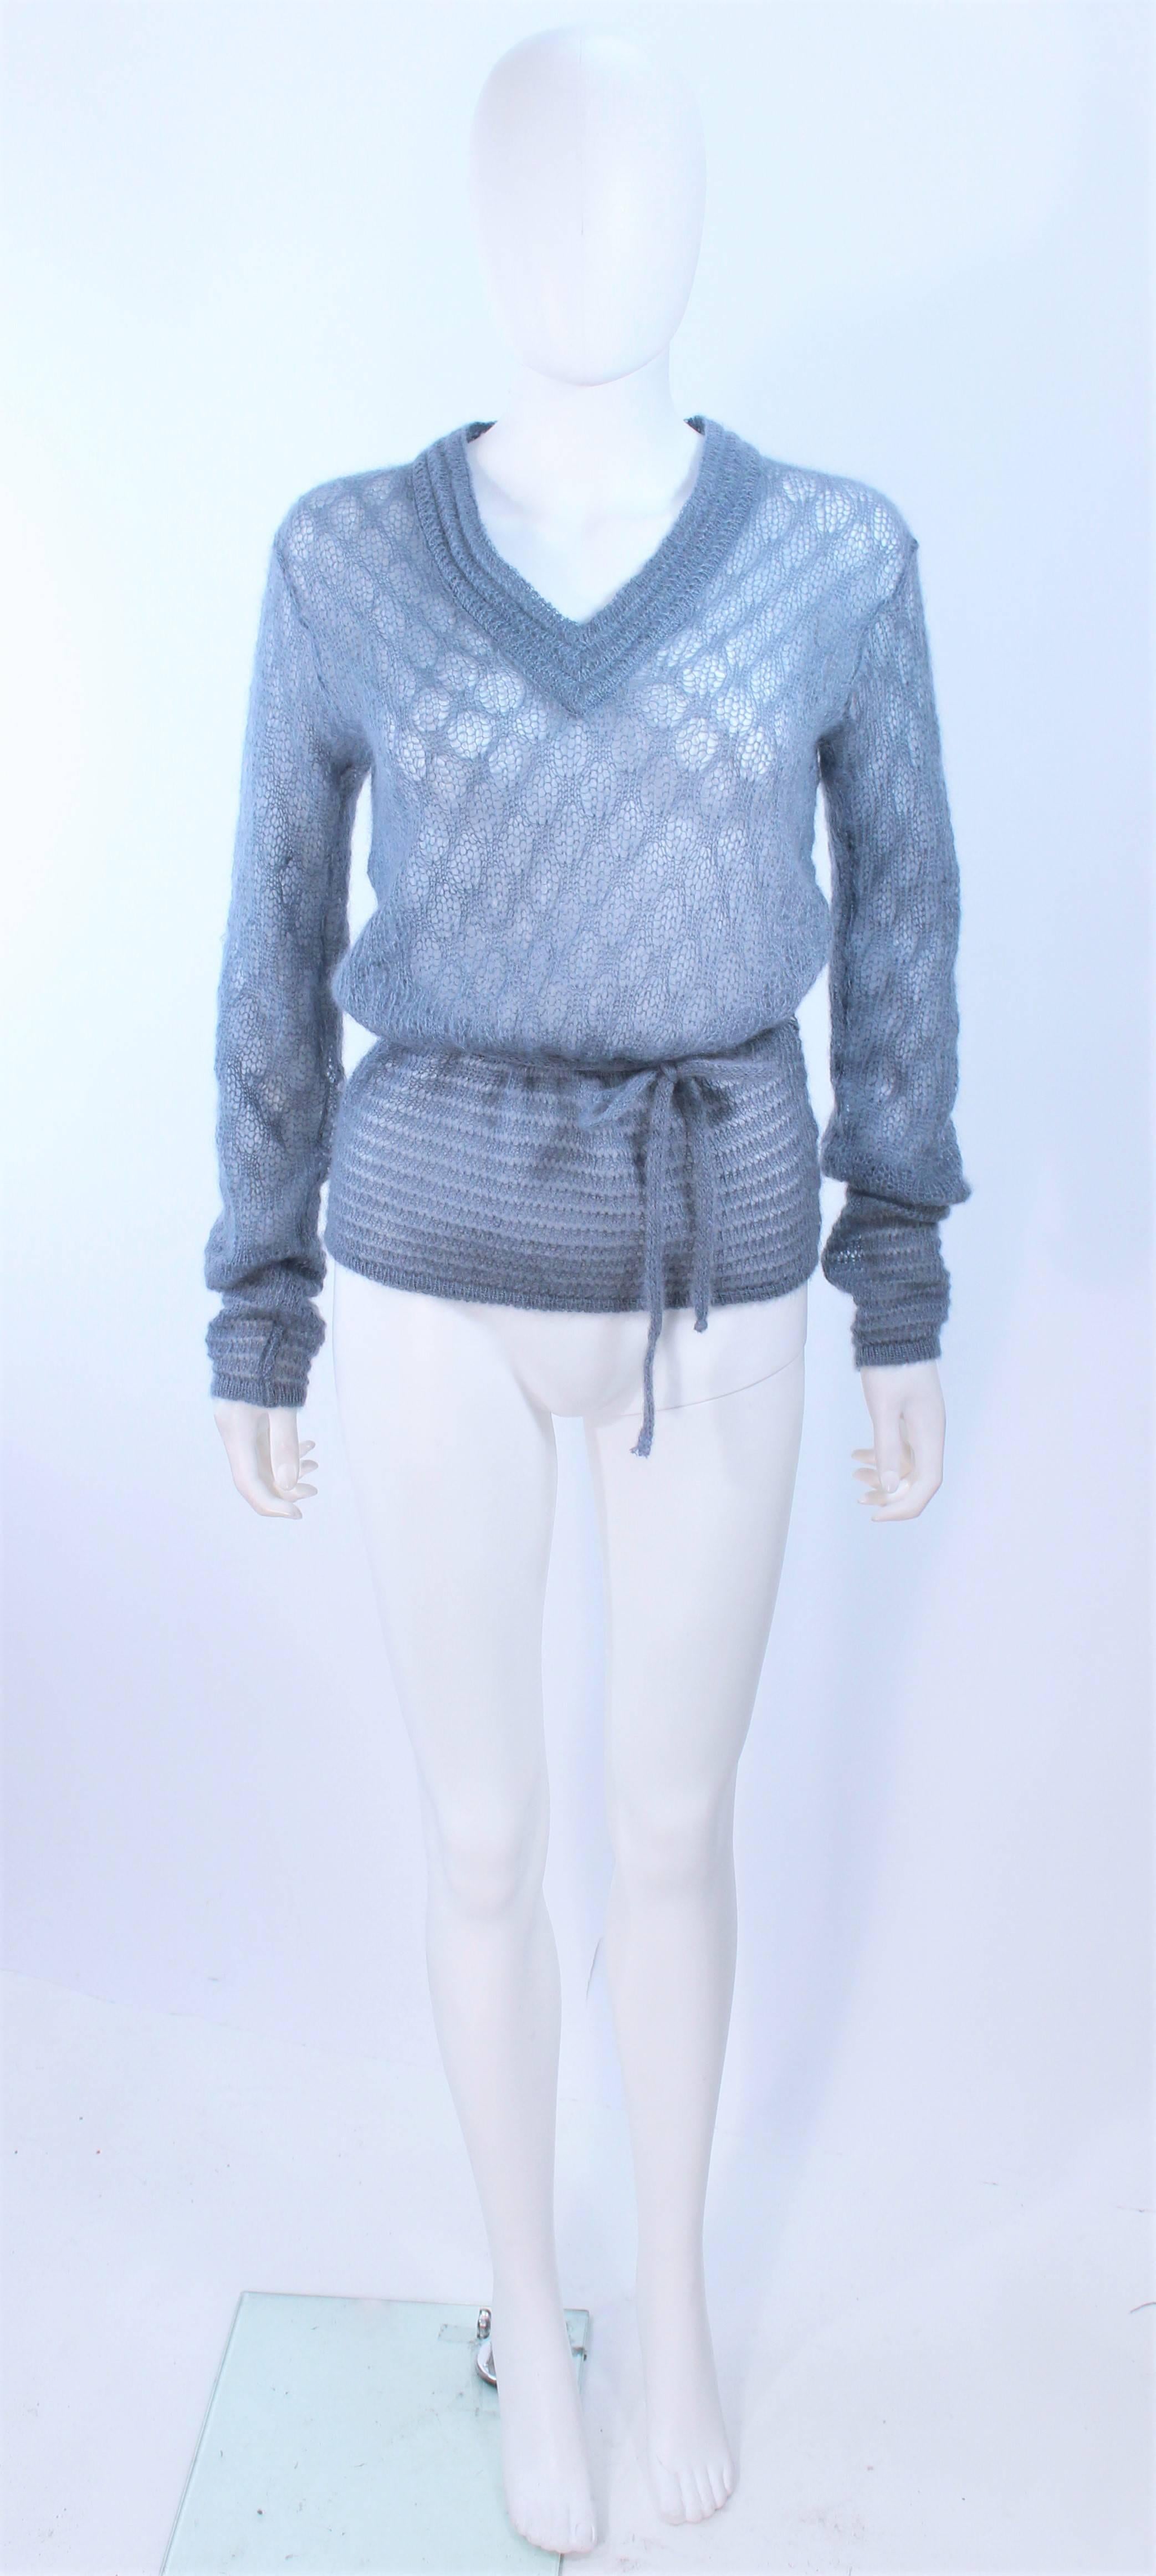 This Missoni design is composed of a sky blue wool with a semi sheer knit property. Features a v-neck with waist tie. In excellent vintage condition.

**Please cross-reference measurements for personal accuracy. Size in description box is an